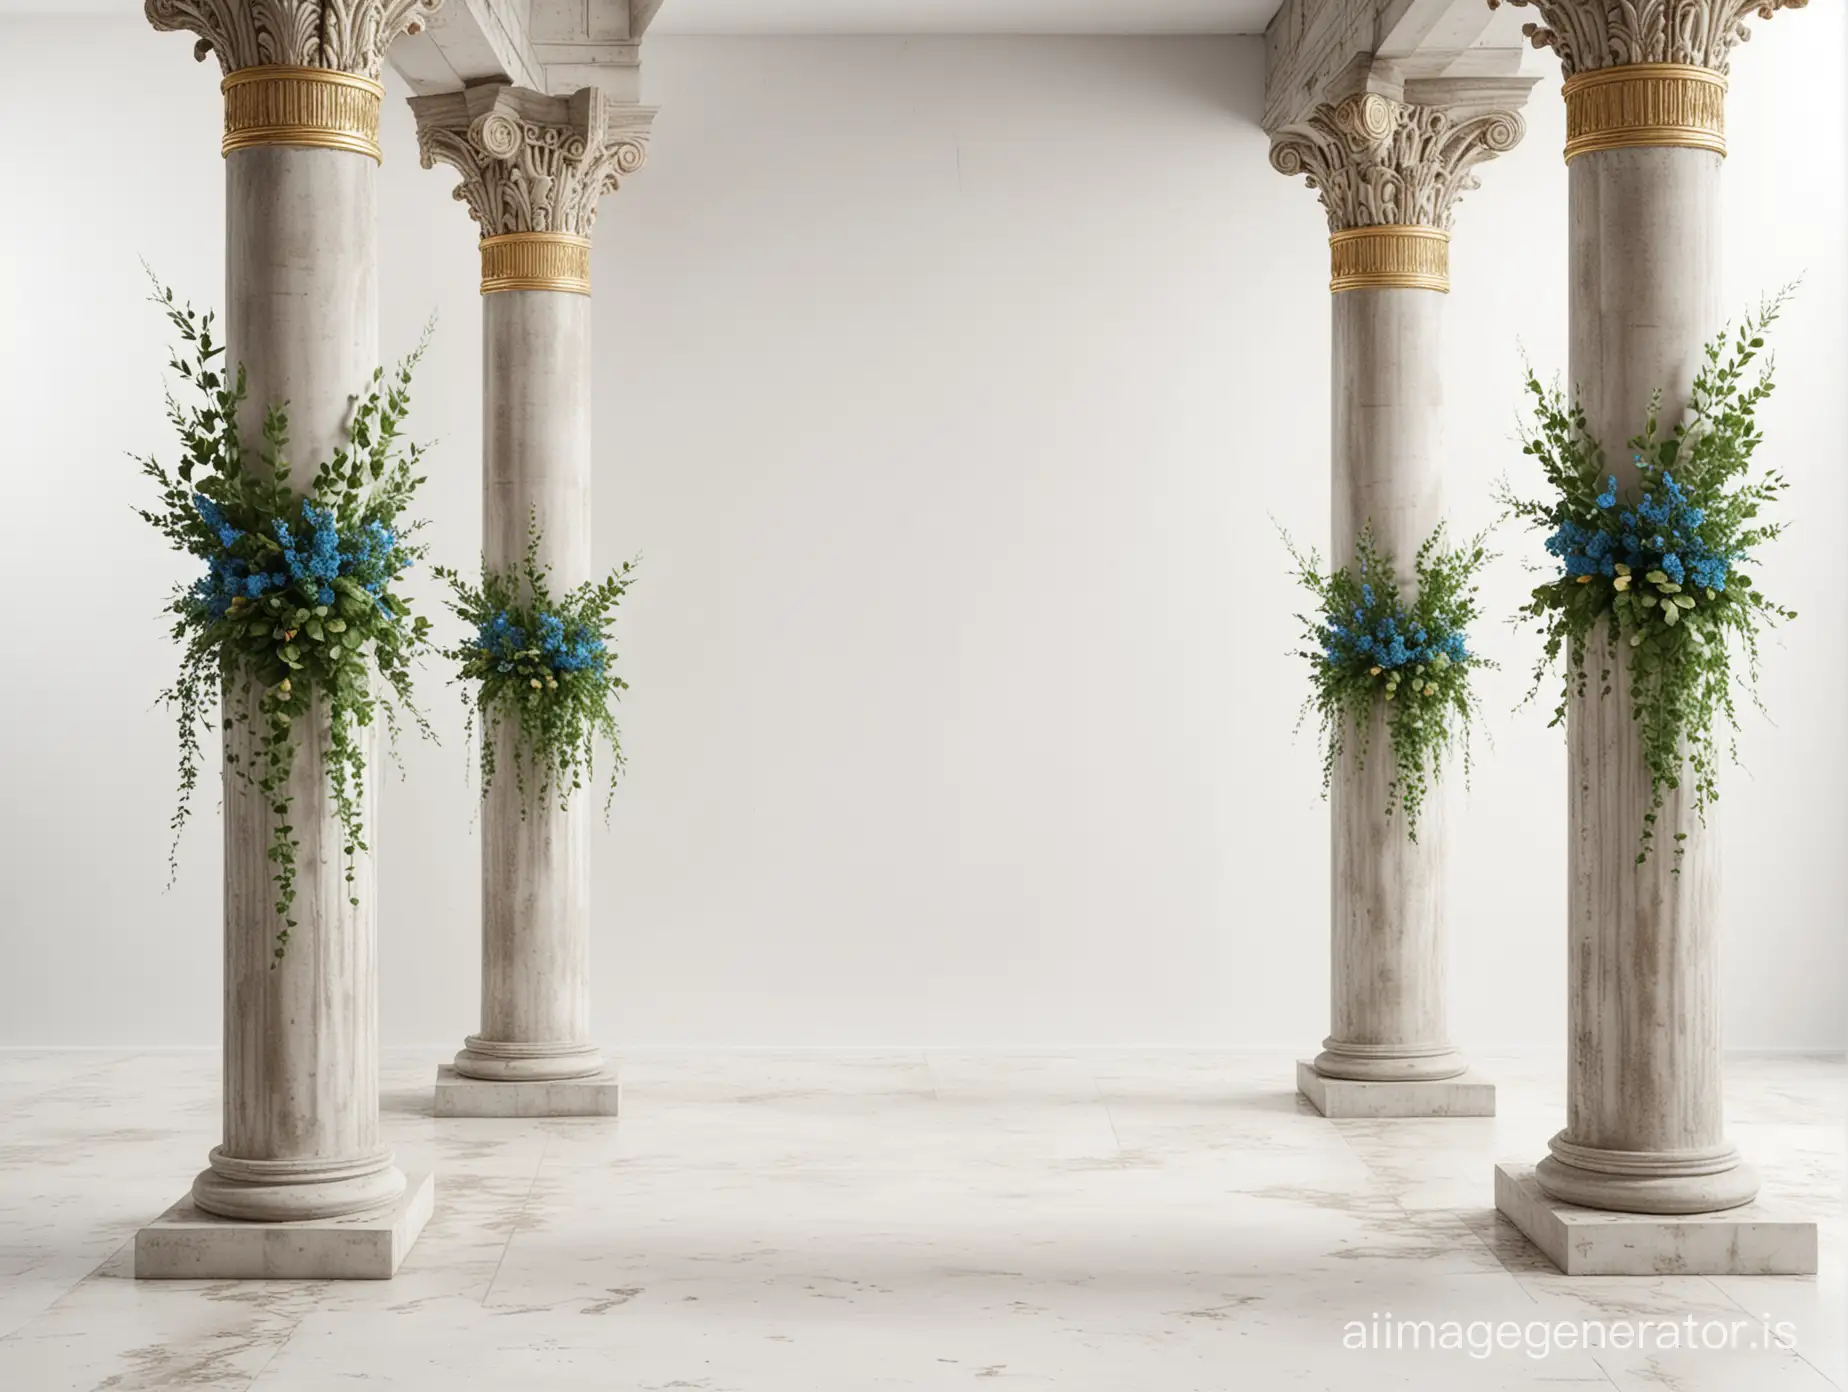 Ancient-Columns-Revival-with-Golden-Blue-Accents-and-Cypress-Greenery